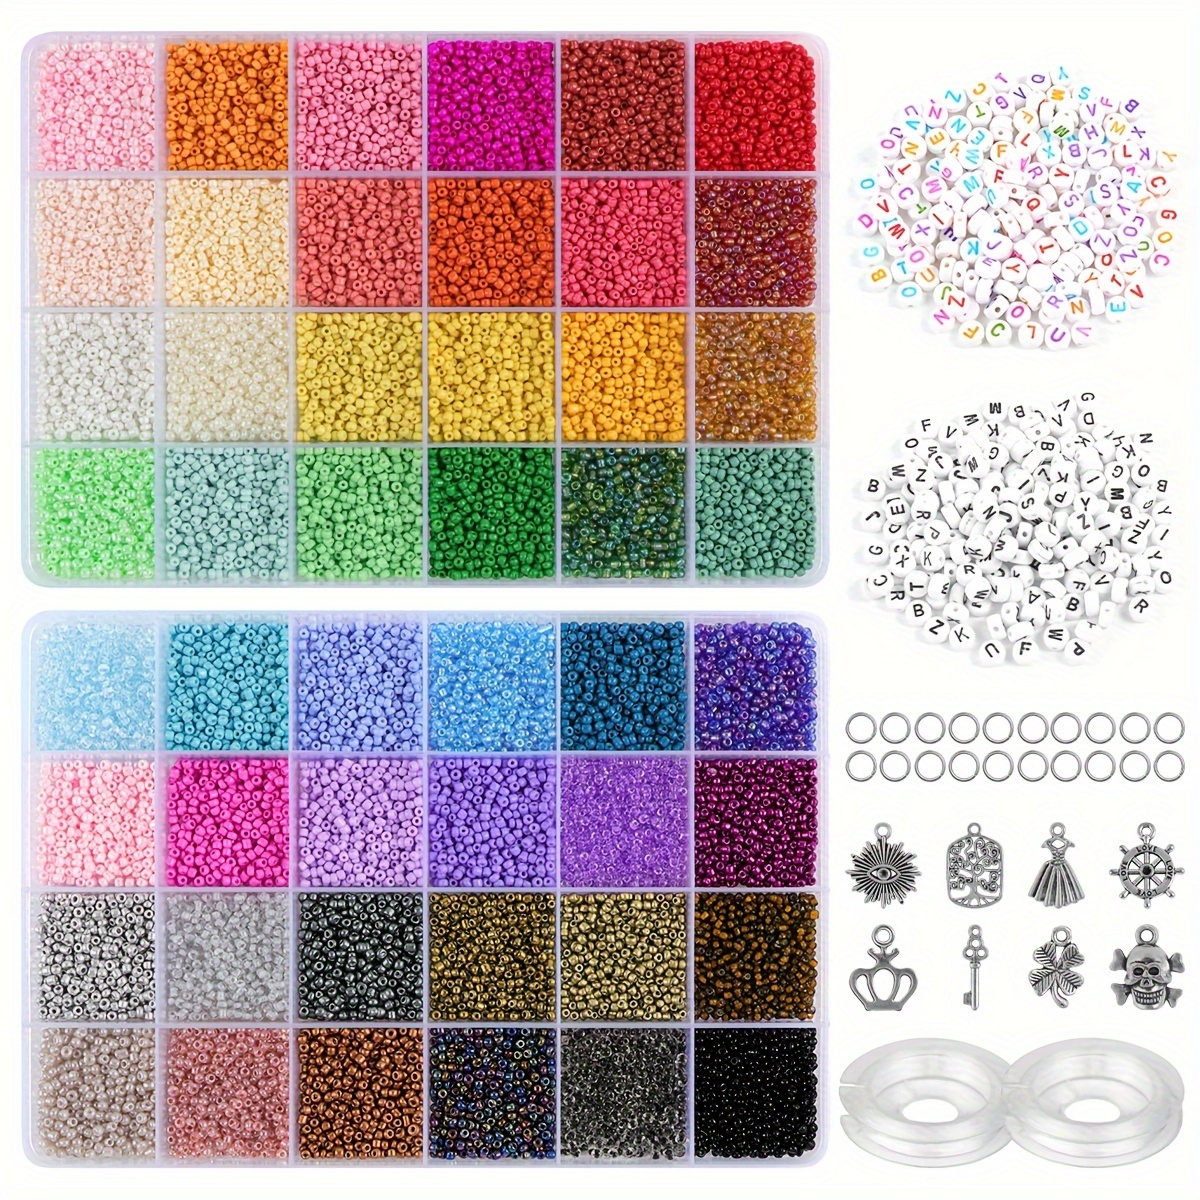 200pcs 10mm Glass Seed Beads for Jewelry Making, Bead Set for Bracelet  Necklace Making, DIY, Arts and Crafts